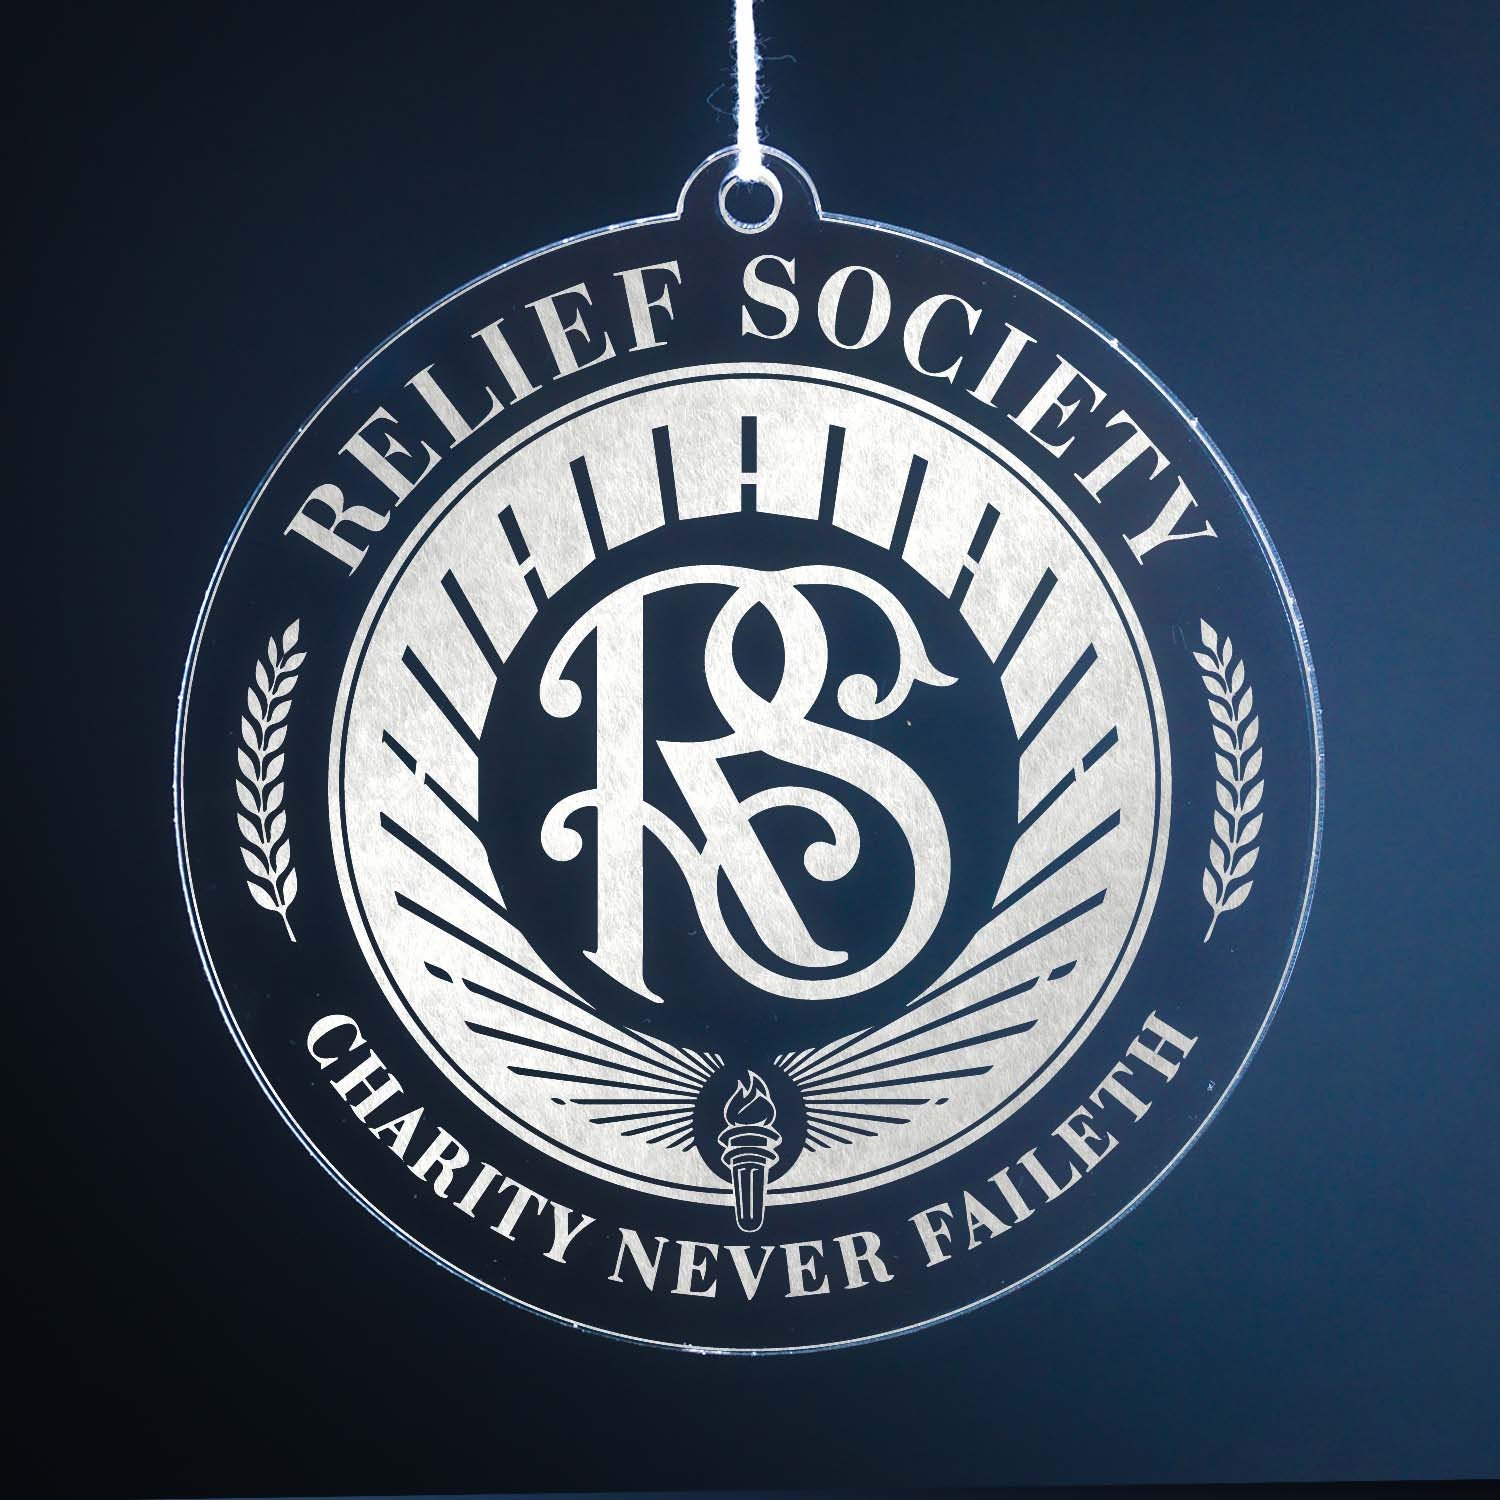 Relief Society Seal Black And White Clipart